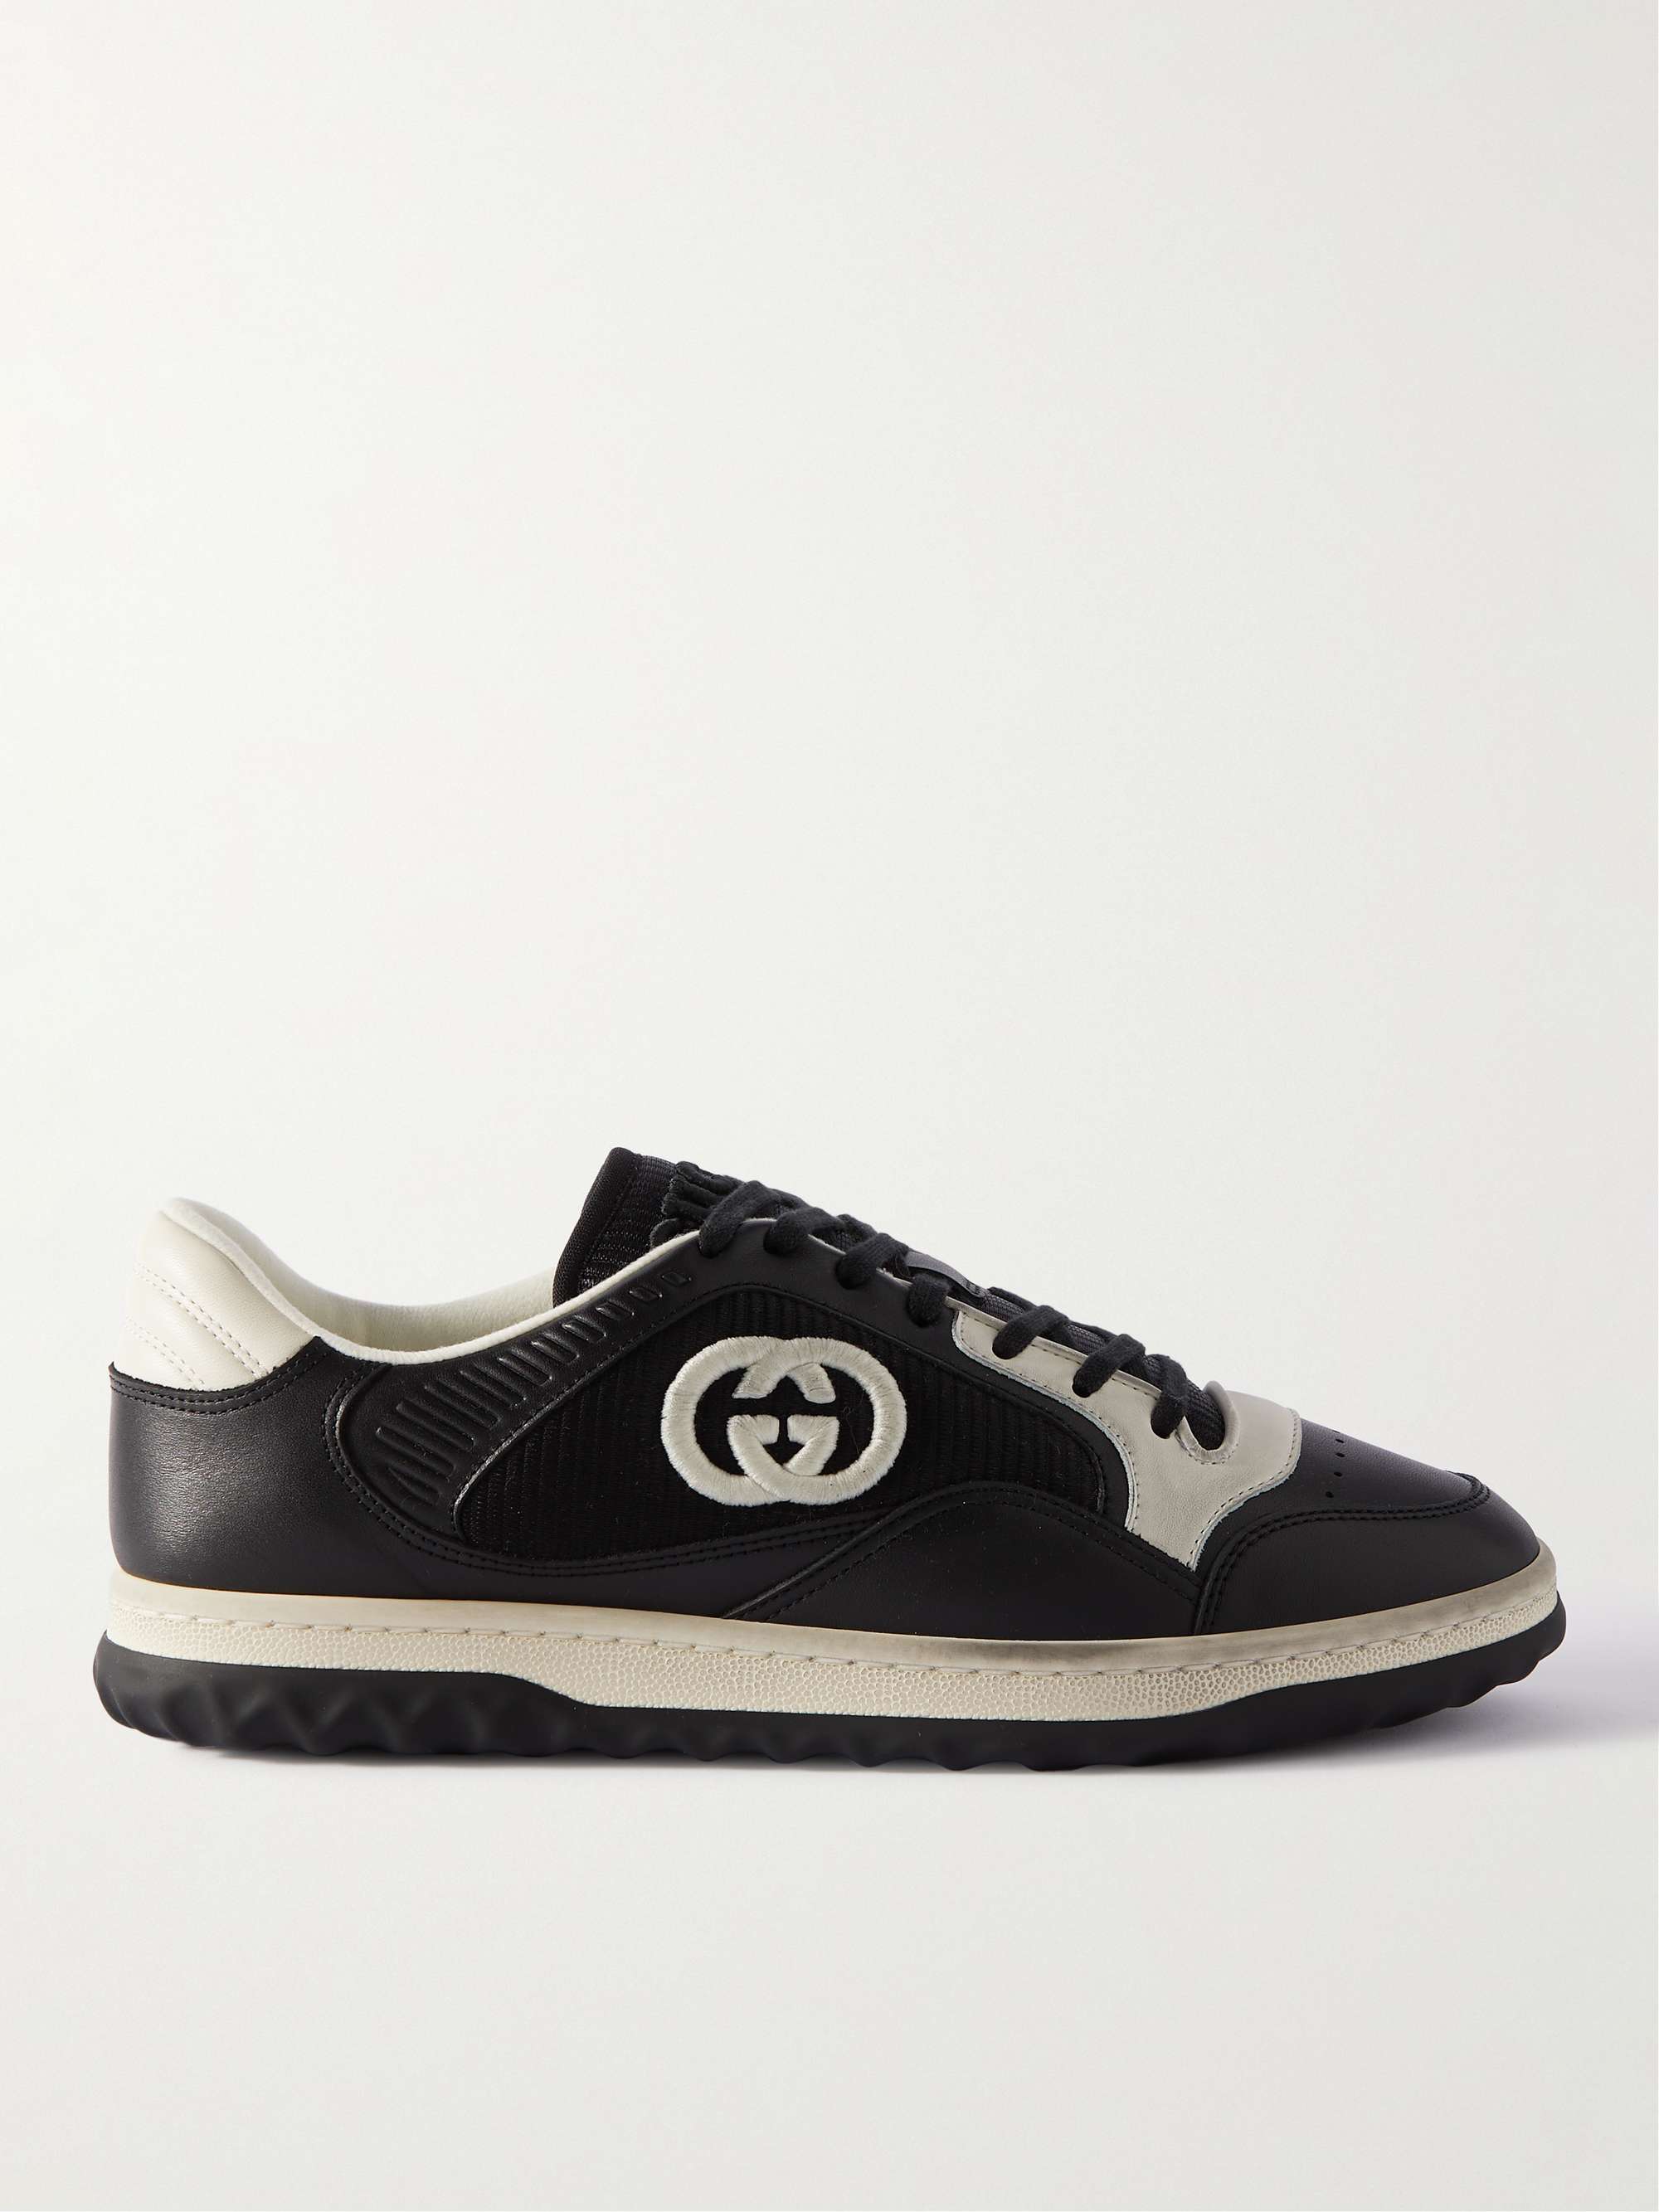 GUCCI Logo-Embroidered Mesh and Leather Sneakers for Men | MR PORTER